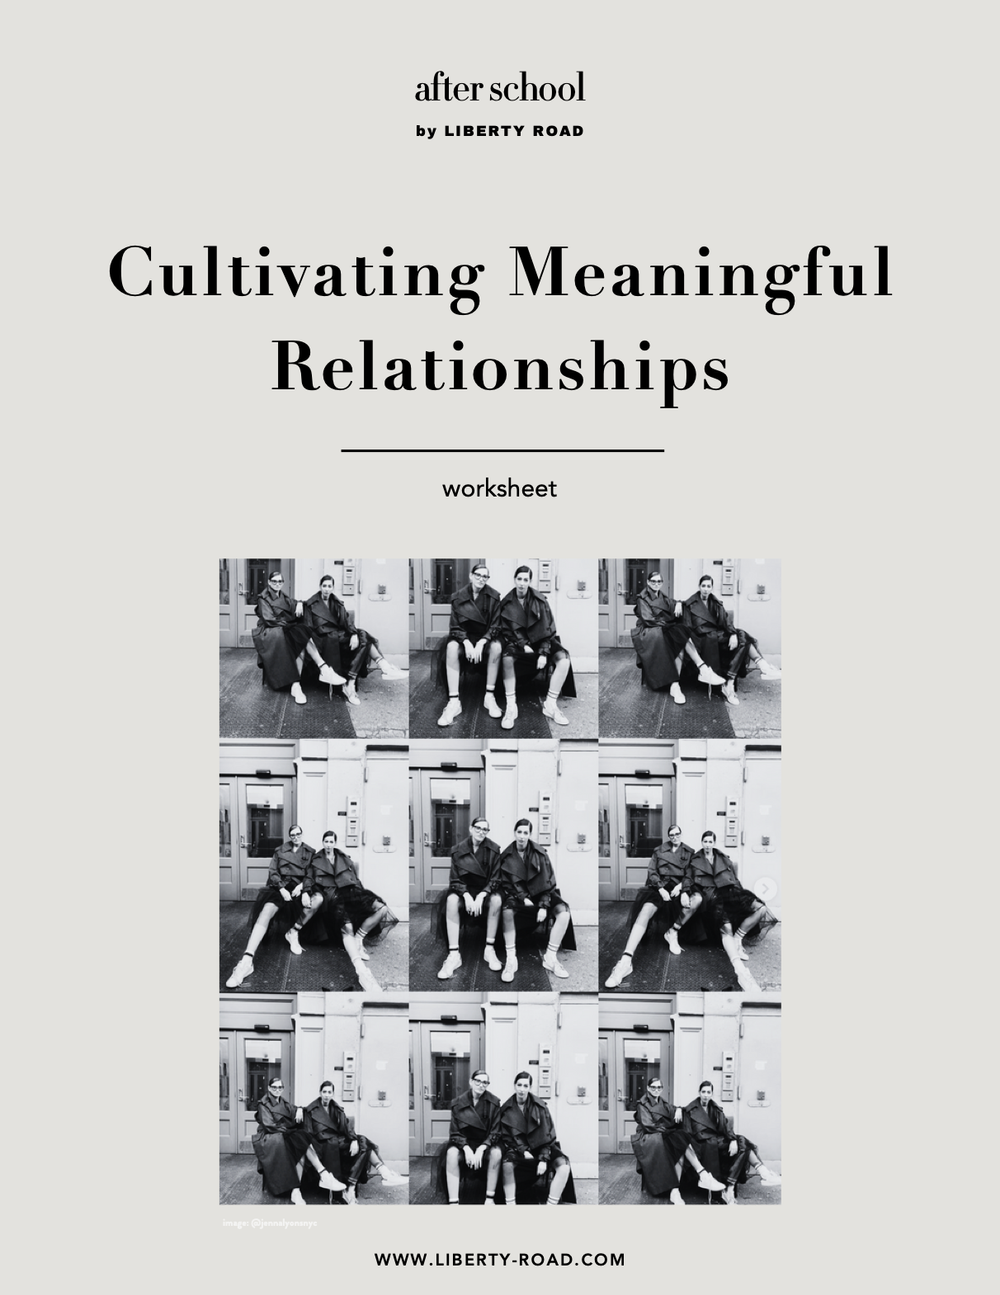 after school: Cultivating Meaningful Relationships Worksheet